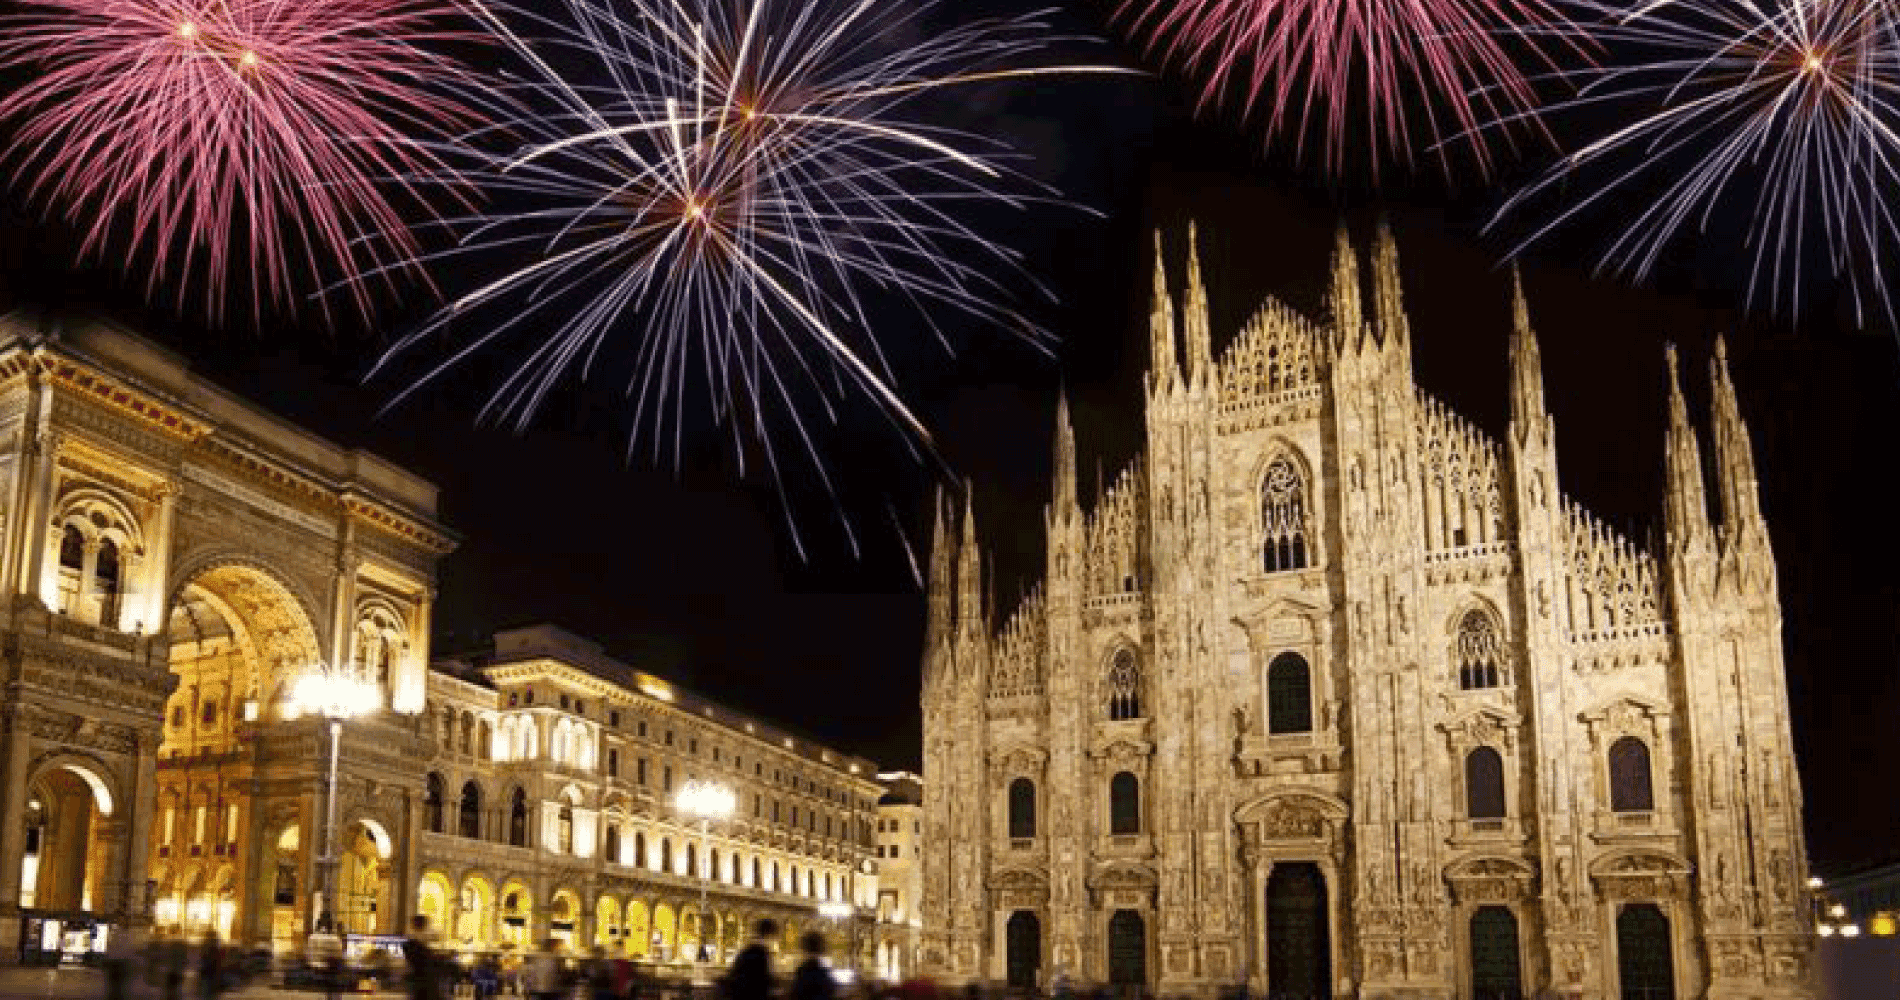 15 Best places to visit in new year's celebrations